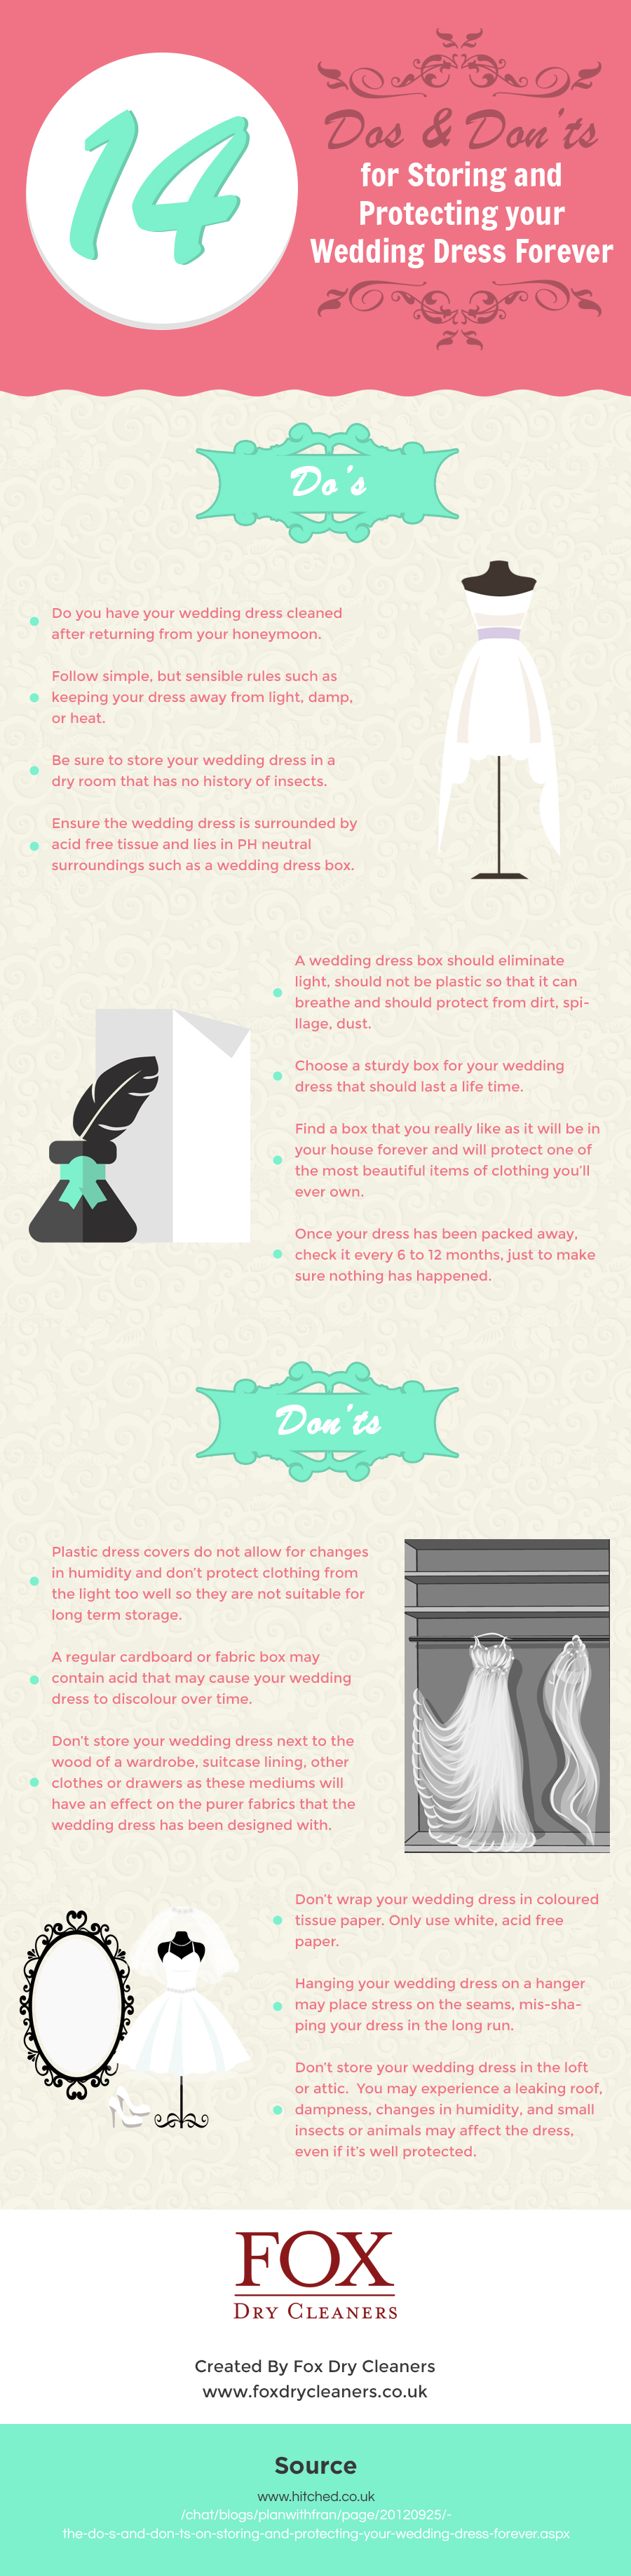 14 Dos & Donts for Storing and Protecting your Wedding Dress Forever